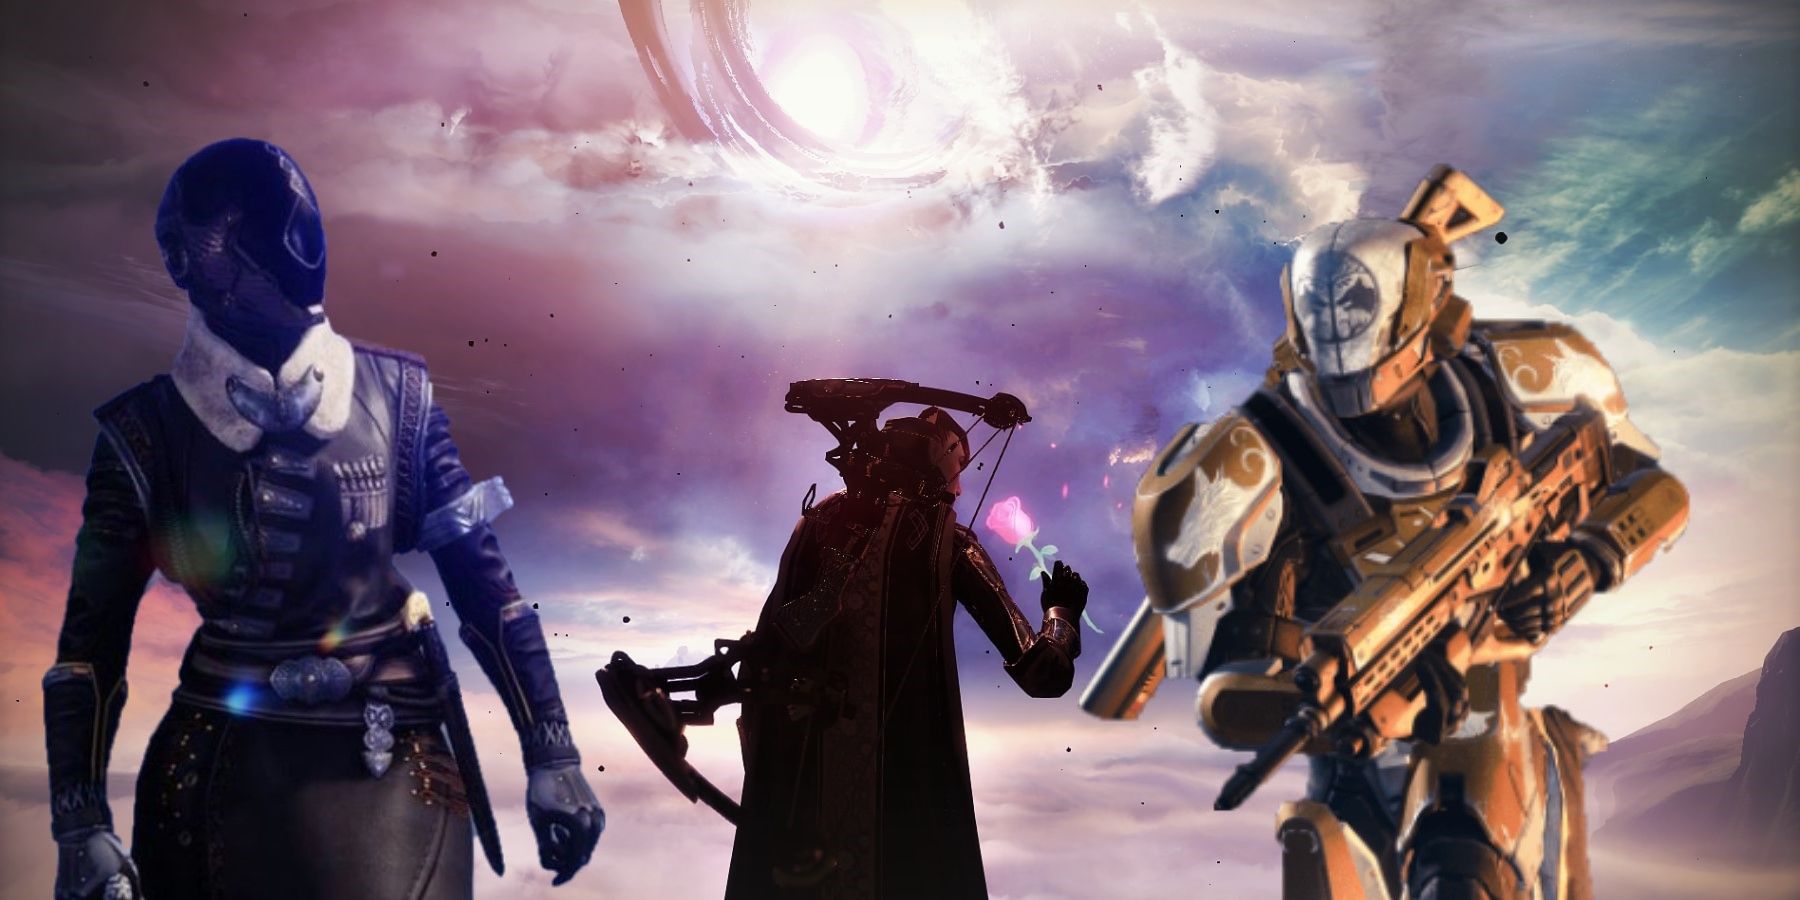 destiny 2 players point out problems with builds becoming relevant 30th anniversary pack sanbox update abilities supers differentiated cooldowns